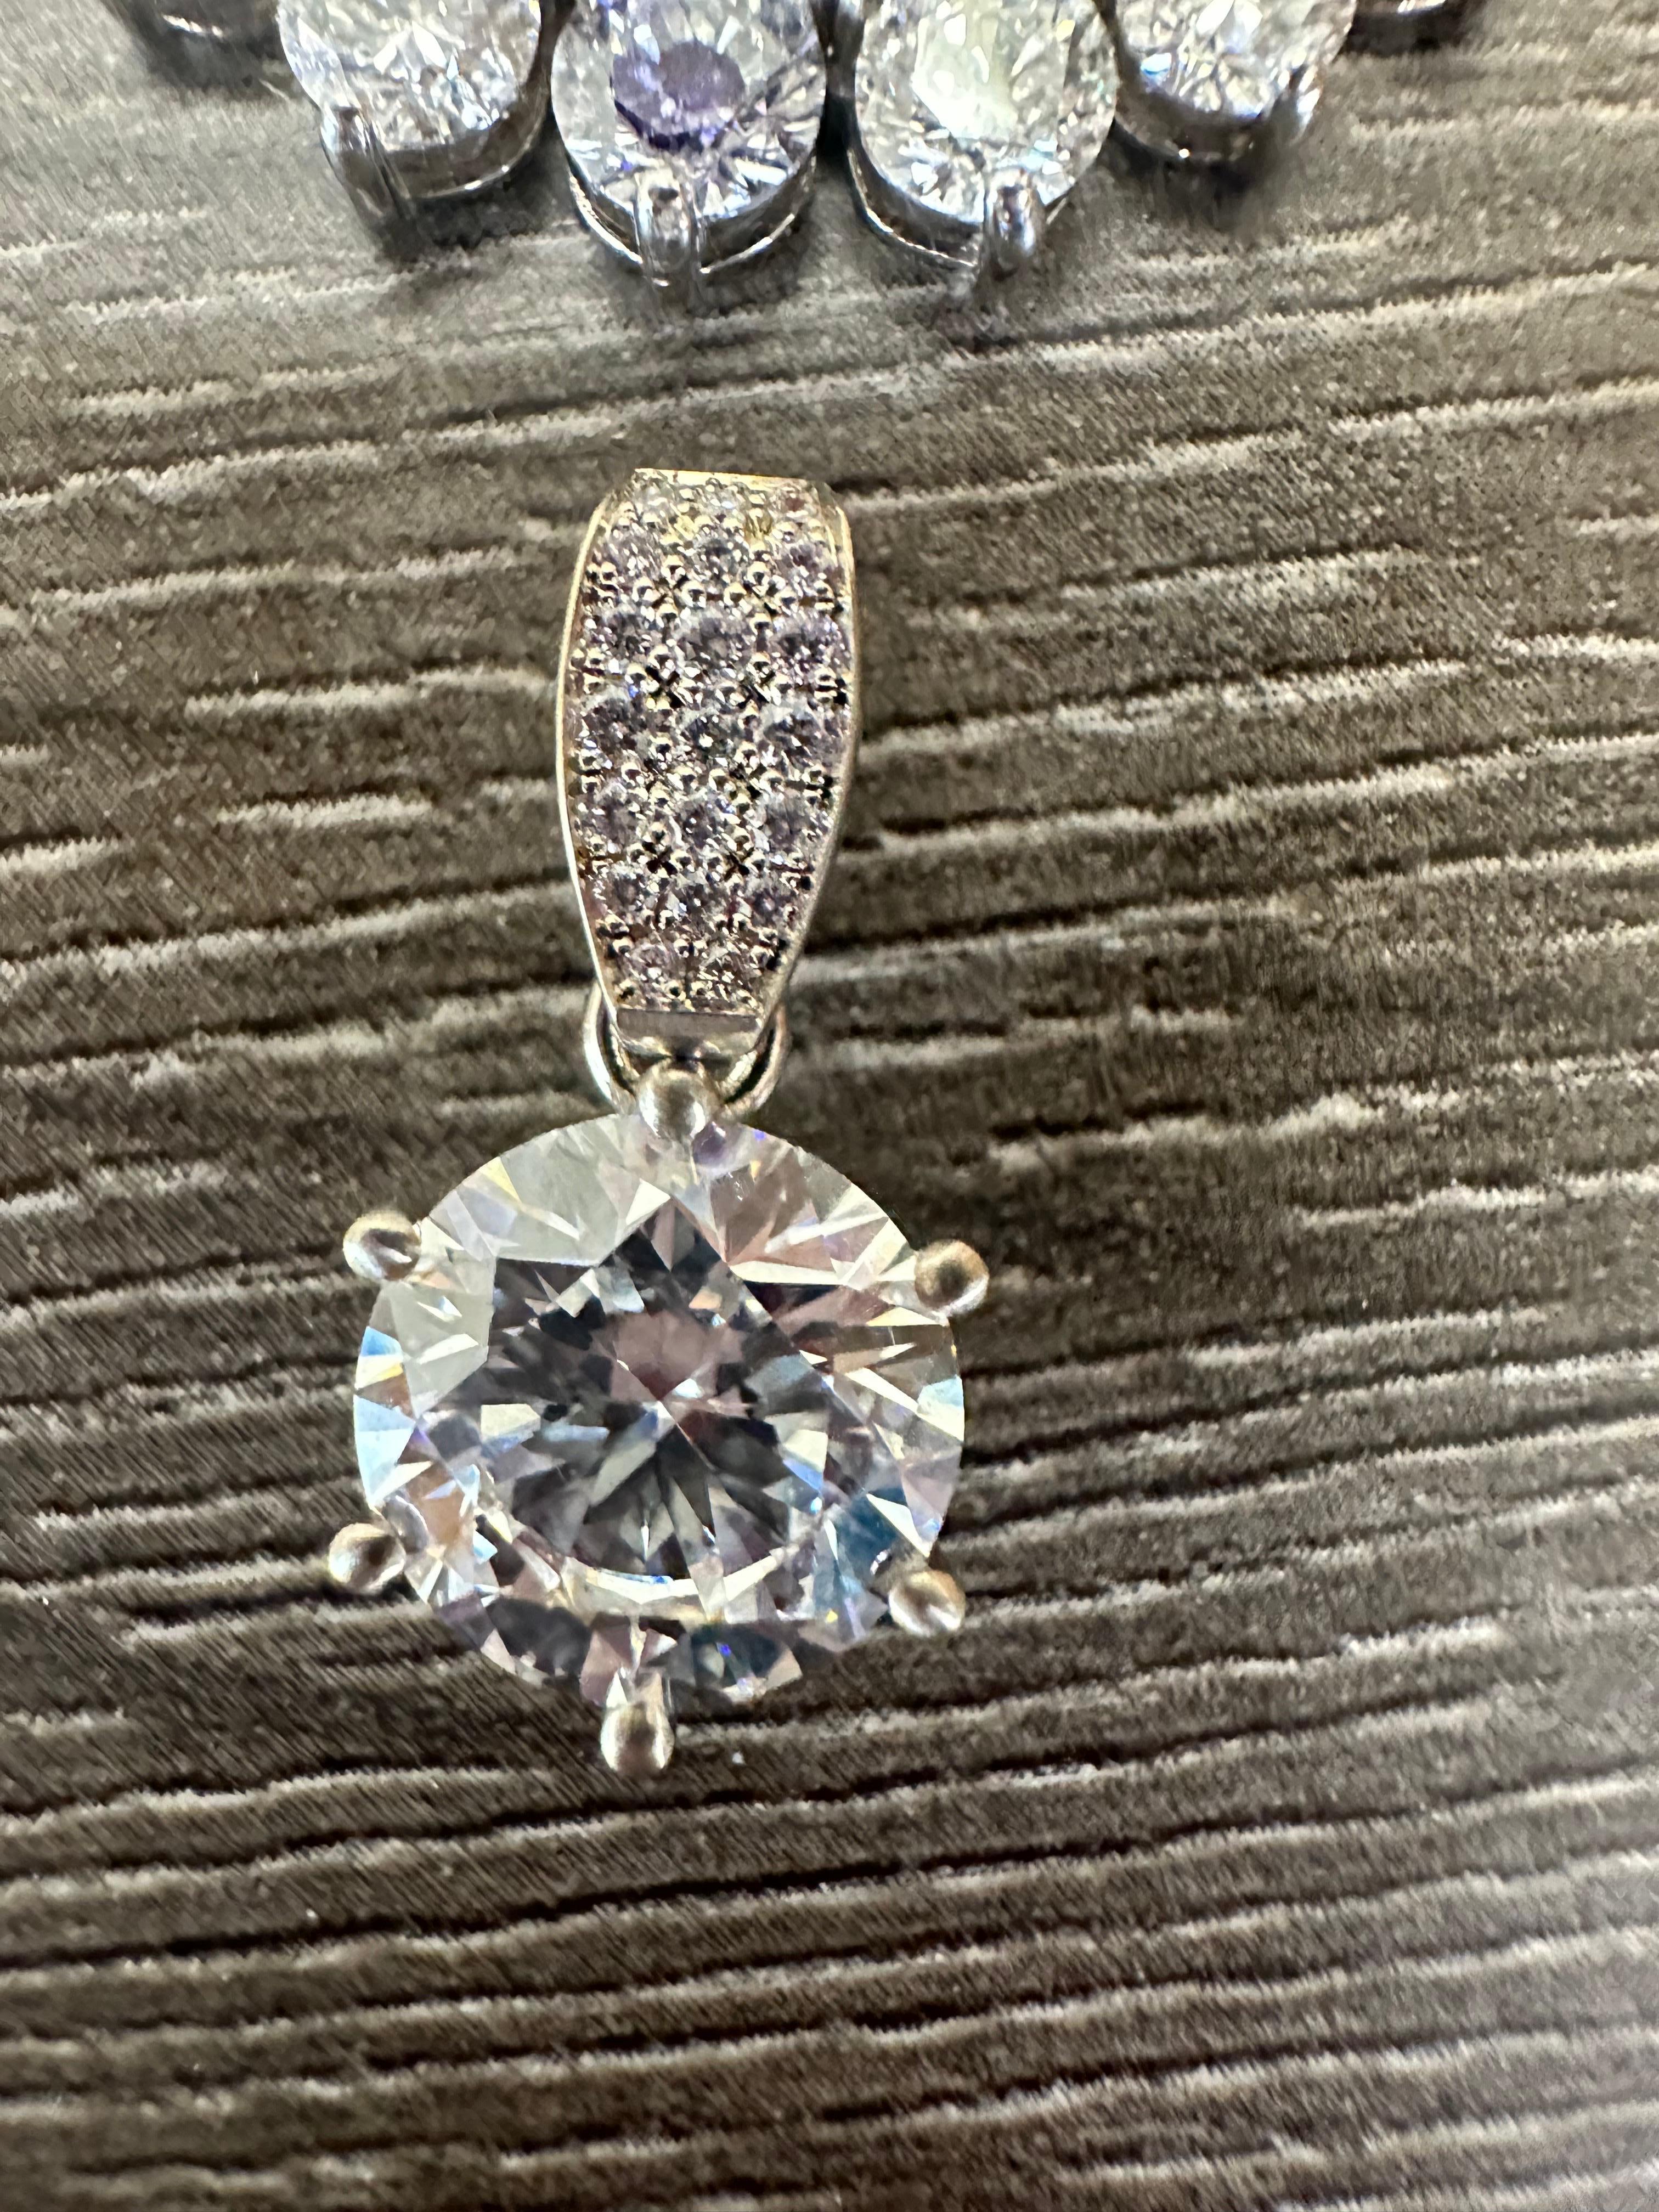 Stunning pendant can be worn on any strand of pearls on its own or on your existing favorite tennis necklace.
Metal Type: 18KT

Natural Diamond(s): 
Color: F-G
Cut:Round Brilliant
Carat: 0.40ct
Clarity: VS

Center diamond is SI2, G color totalling 4